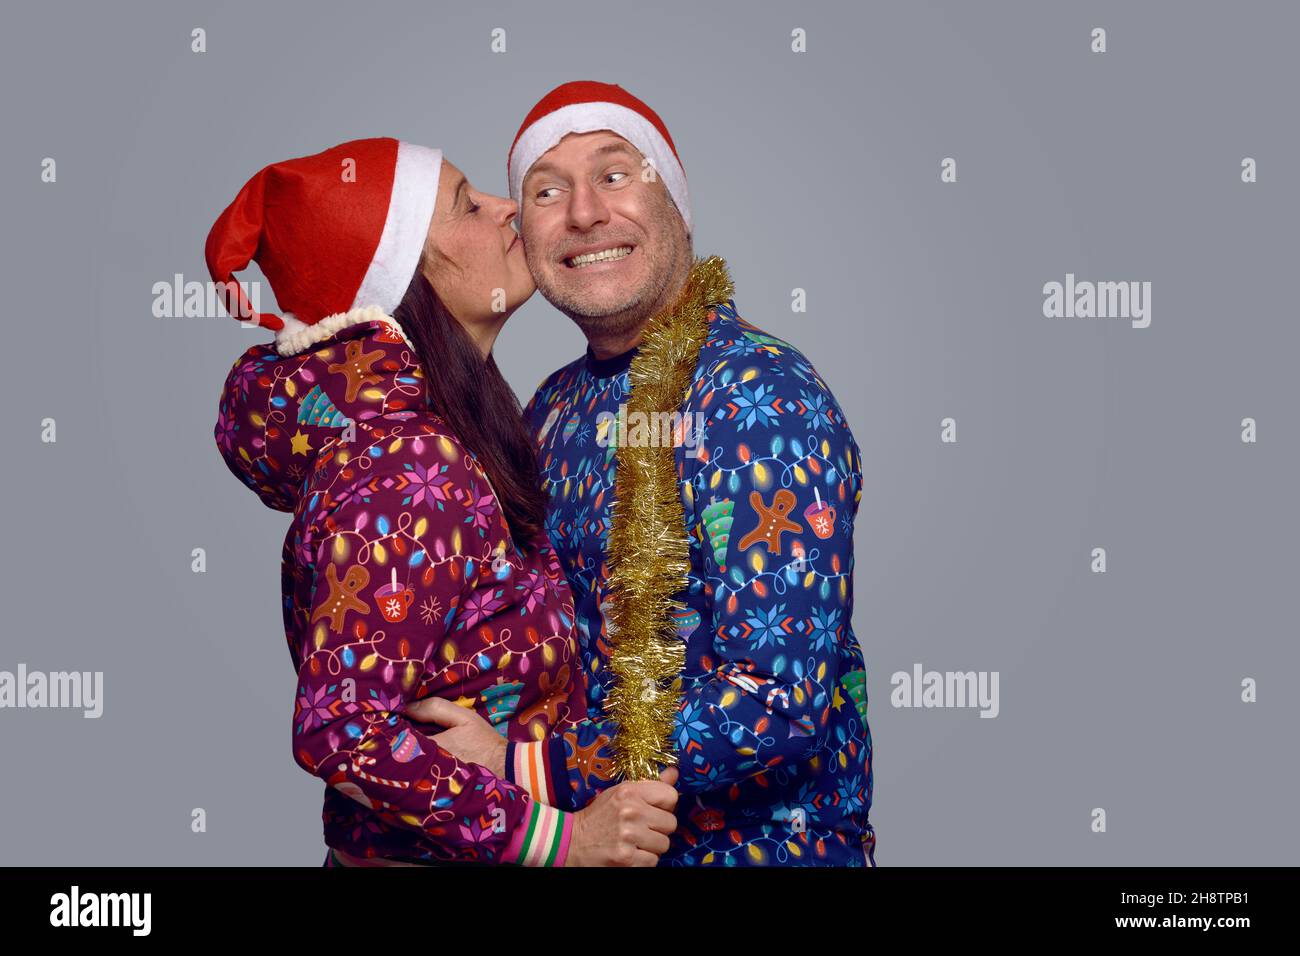 Affectionate middle-aged couple in festive holiday themed Christmas outfits embracing and kissing as they celebrate Xmas together over a grey backgrou Stock Photo